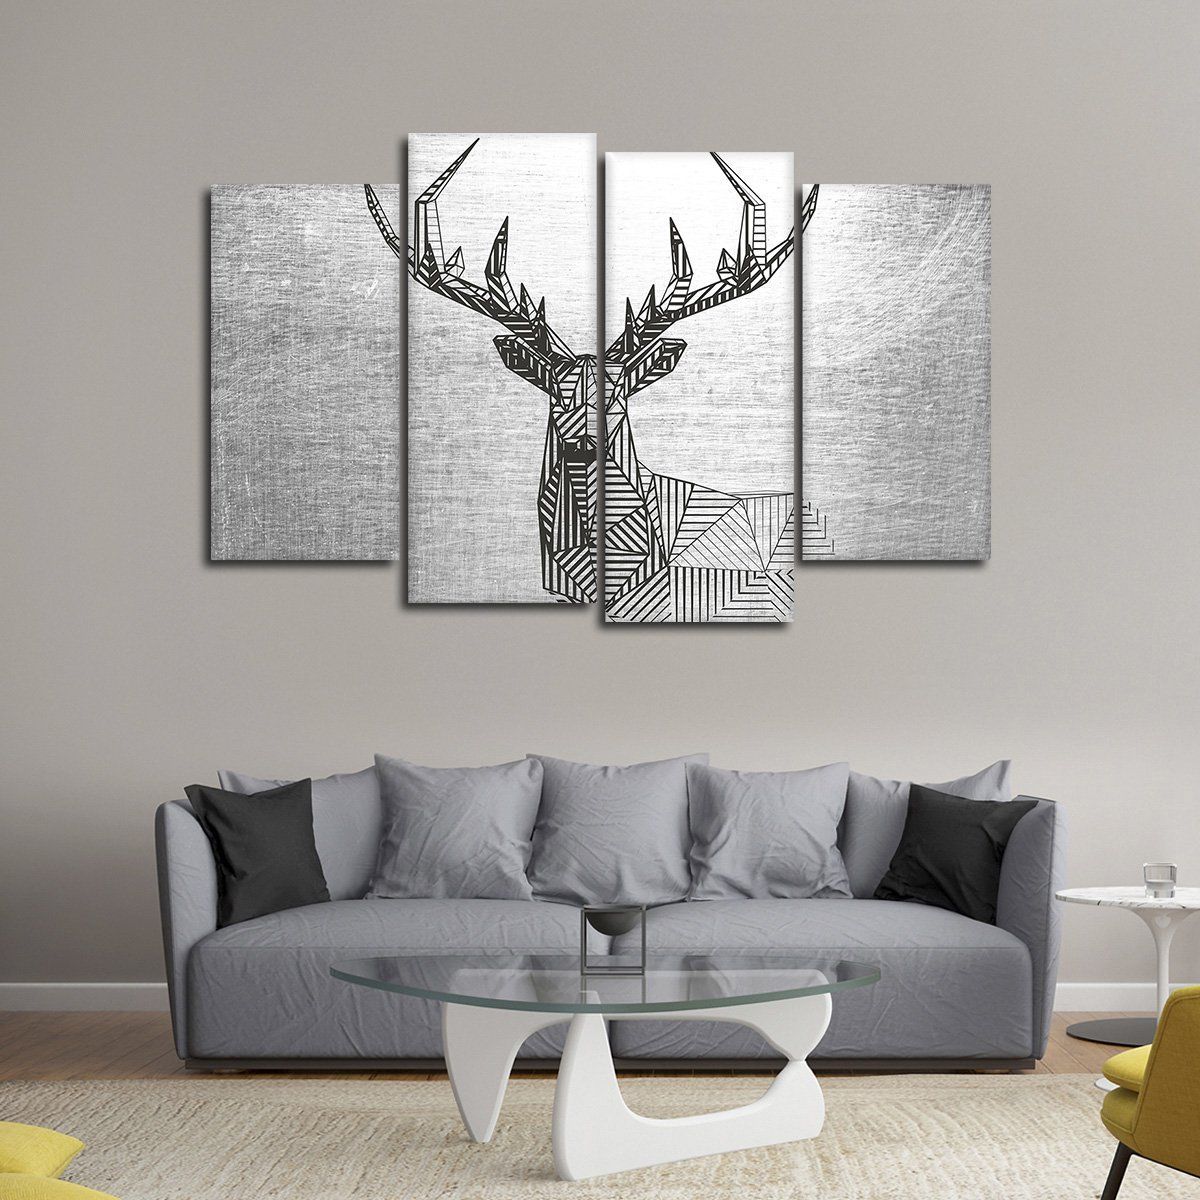 Geometric Deer Multi Panel Canvas Wall Art In 2020 | Geometric Deer Pertaining To Most Recently Released Filigree Screen Wall Art (View 15 of 20)